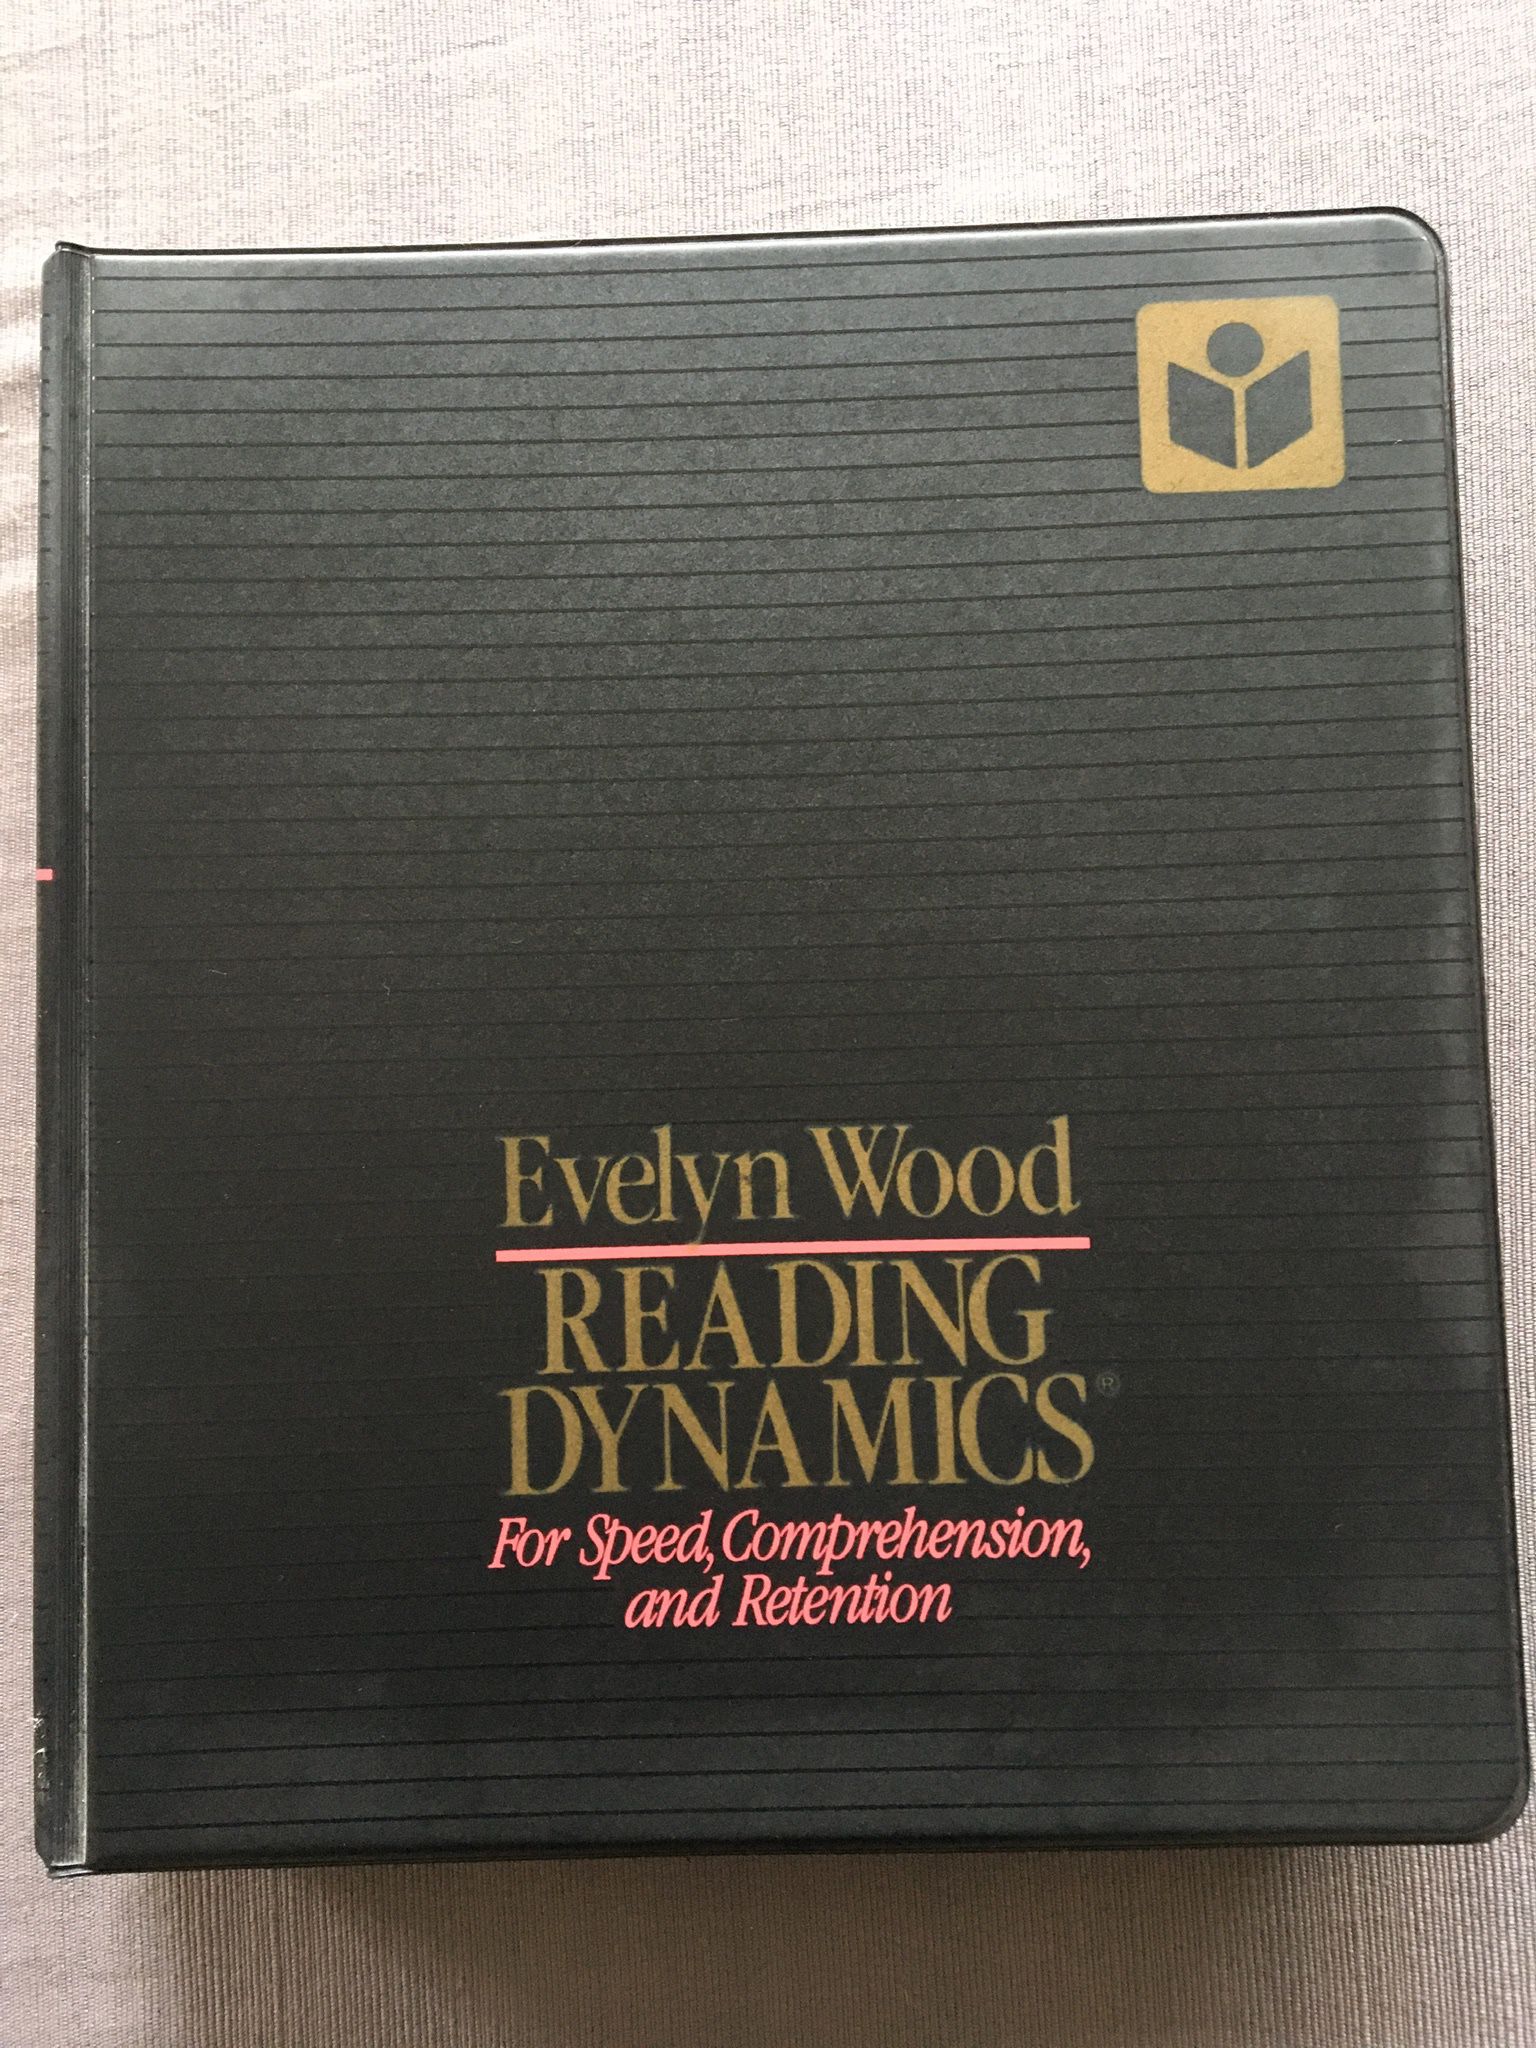 Speed reading course Evelyn Wood audio cassette program new condition 